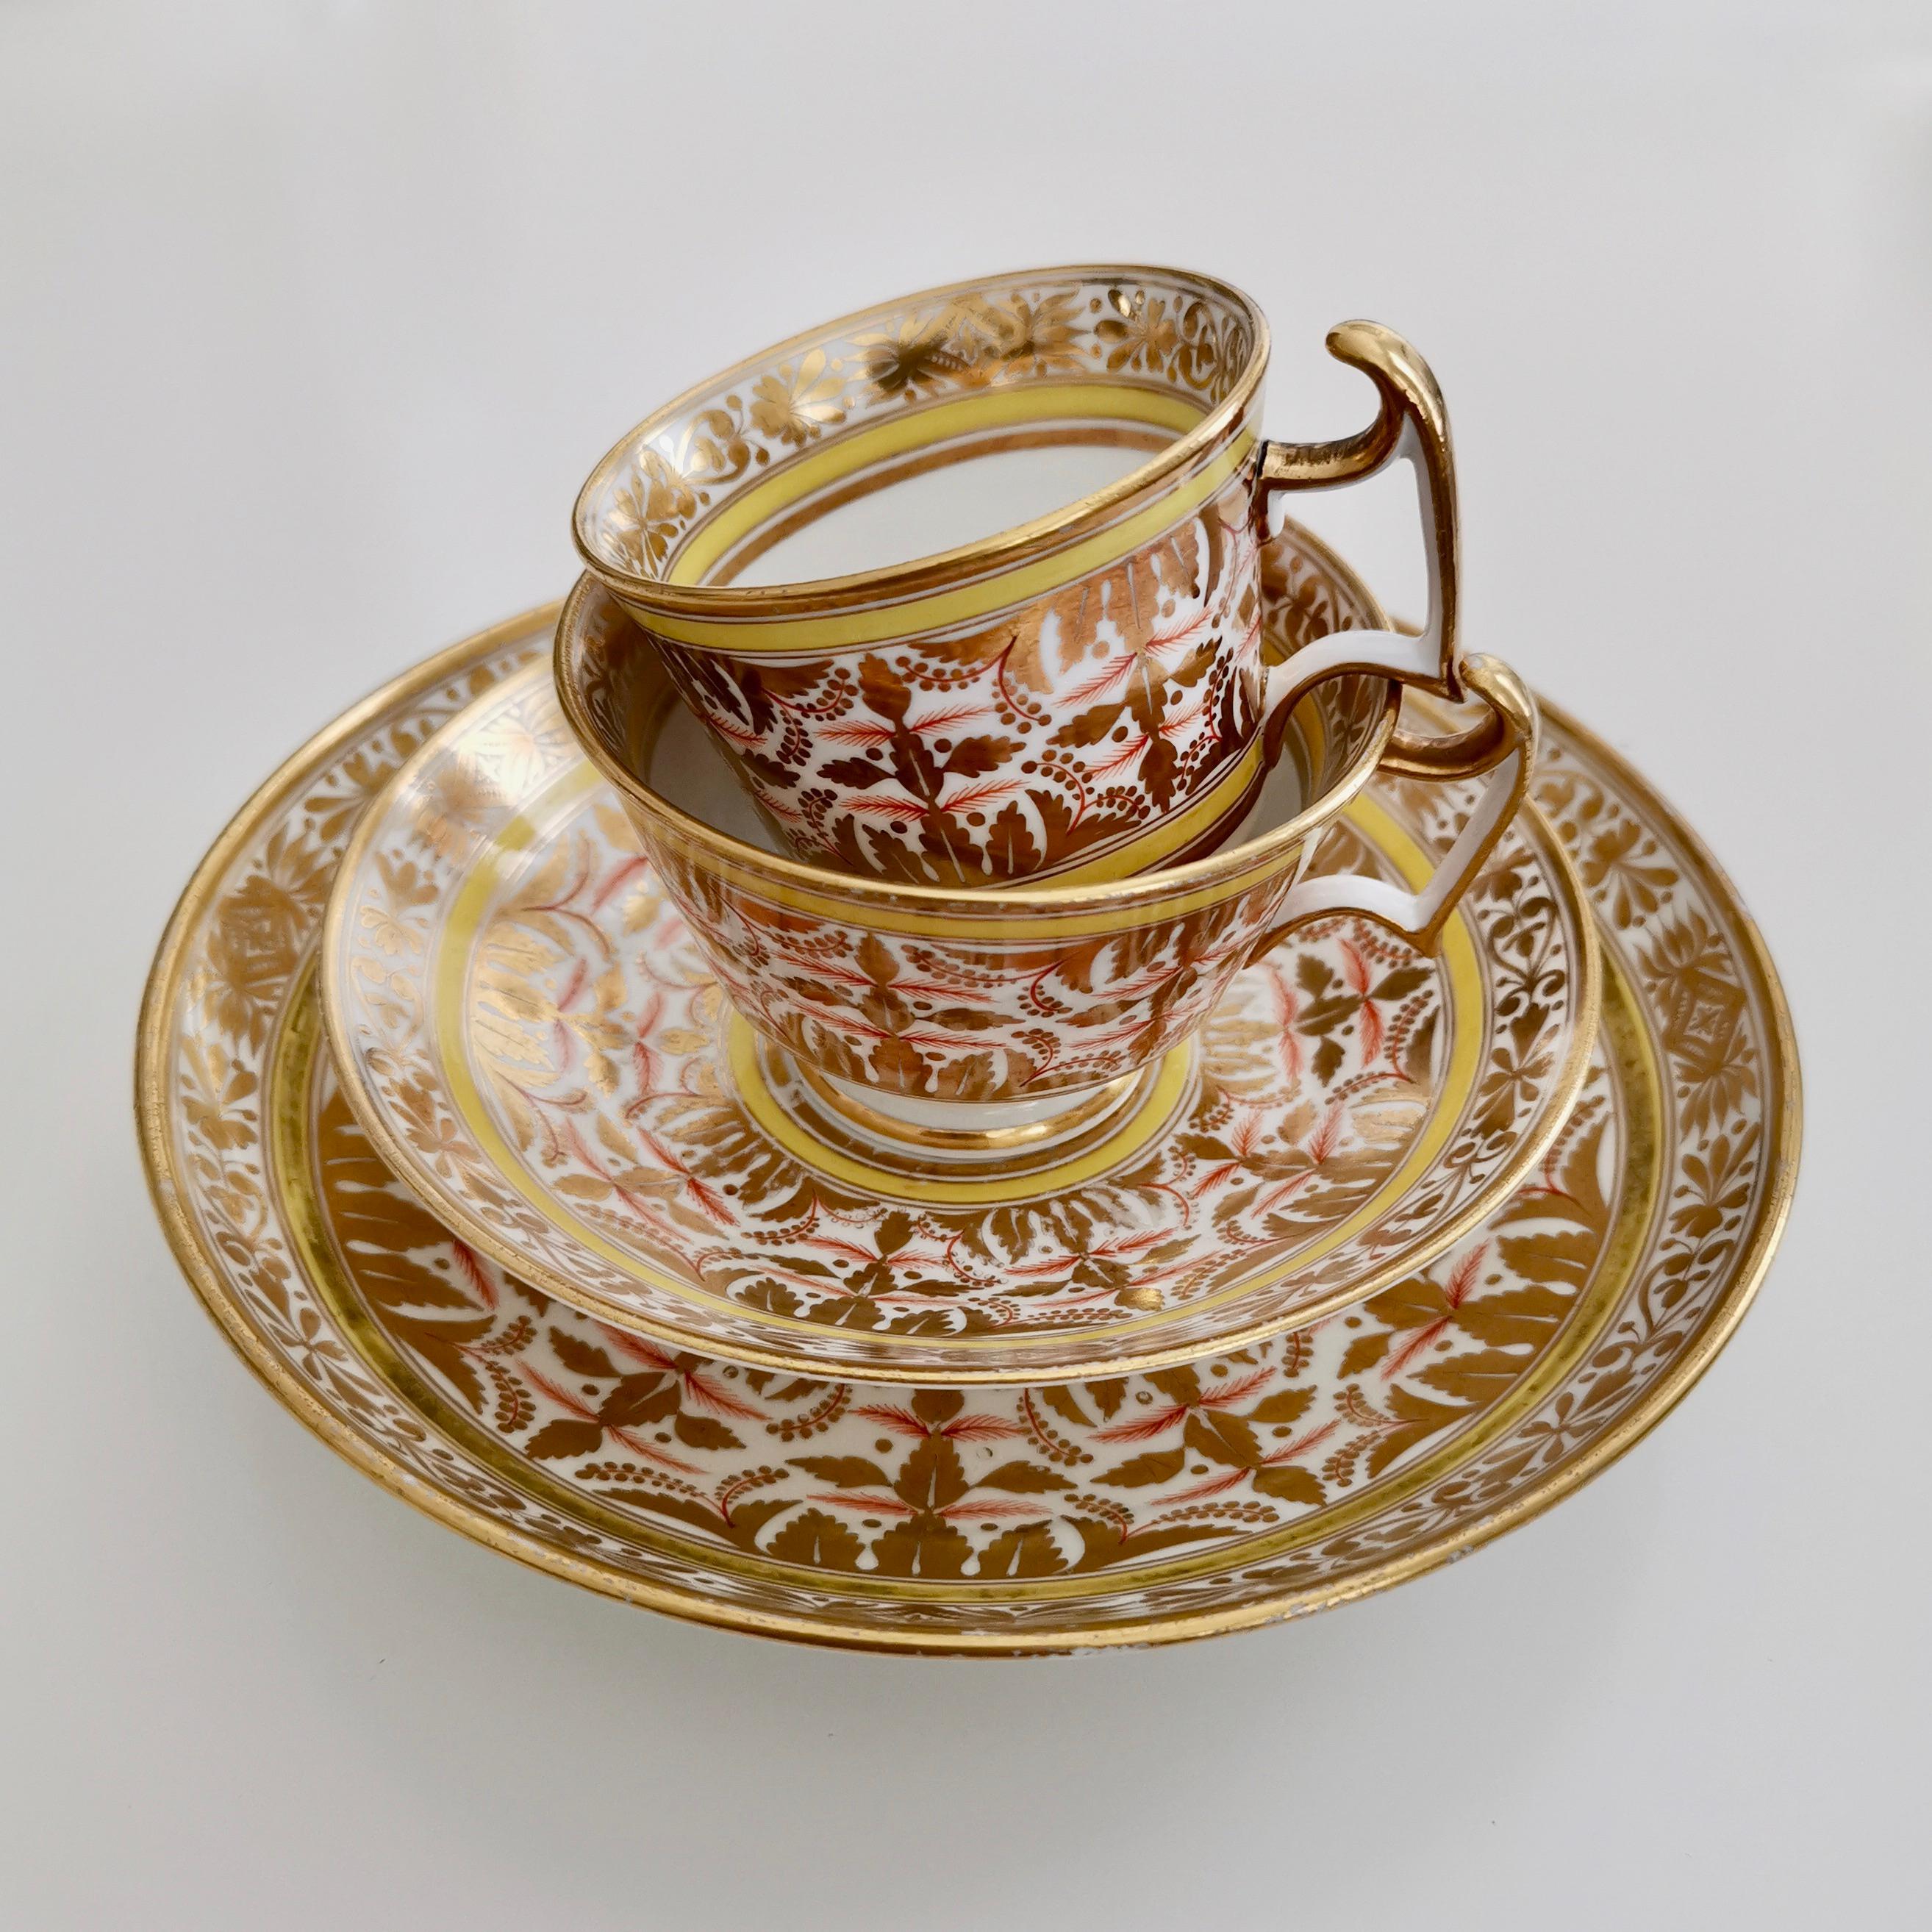 This is a beautiful teacup quartet made by Spode in about 1815. It has a beautiful Regency-style pattern of gilt, yellow and red; a very striking colour combination. The set consists of a teacup, a coffee cup, a saucer and a small cake plate. In the